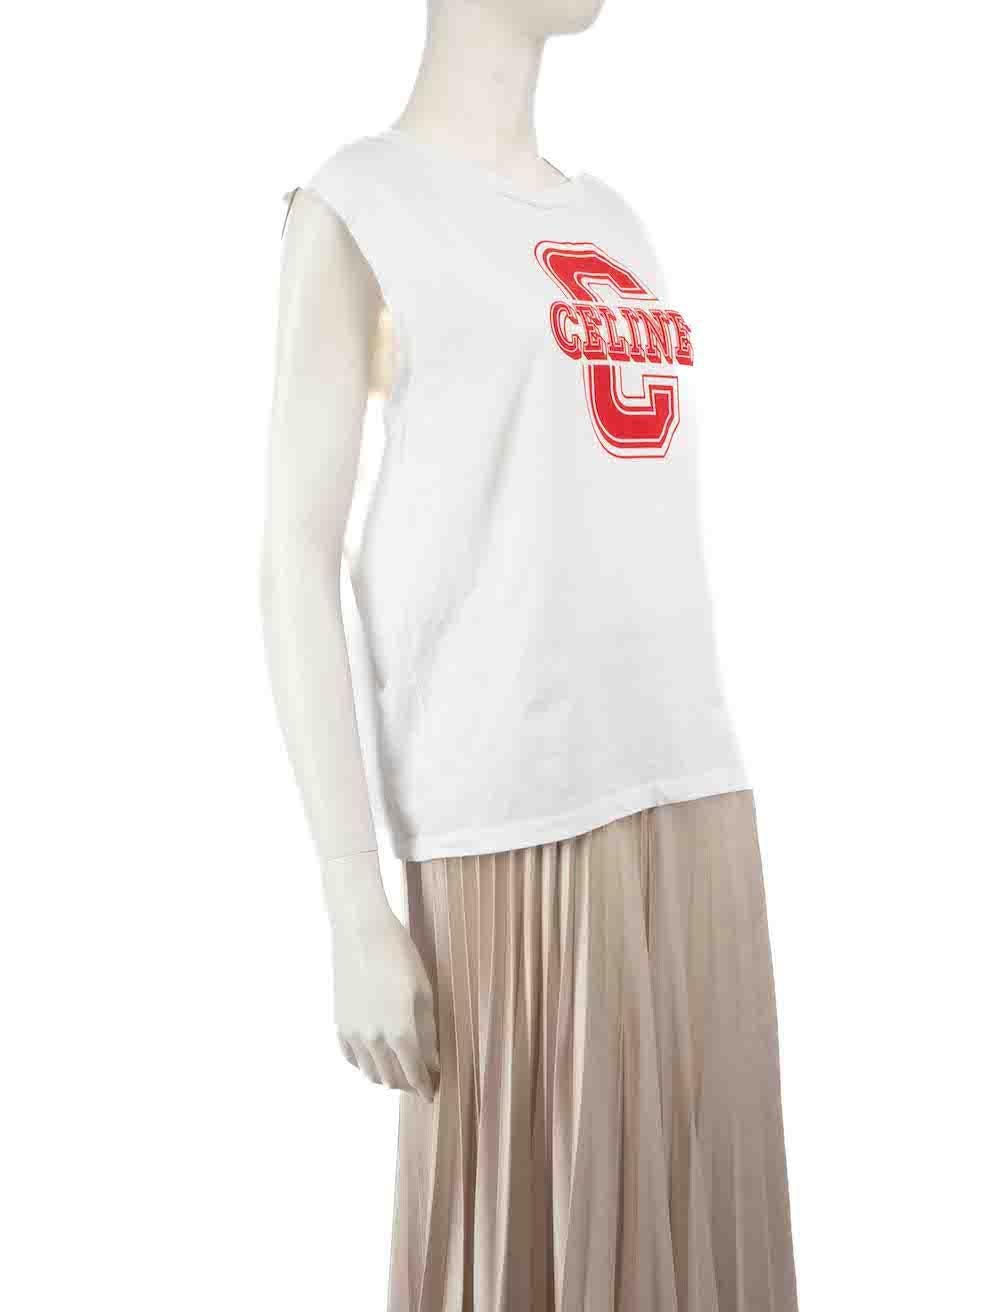 CONDITION is Good. Minor wear to top is evident. Light wear to the front with a small hole and both underarms have slight discolouration on this used Céline designer resale item.
 
 
 
 Details
 
 
 White
 
 Cotton
 
 Sleeveless top
 
 C Logo print